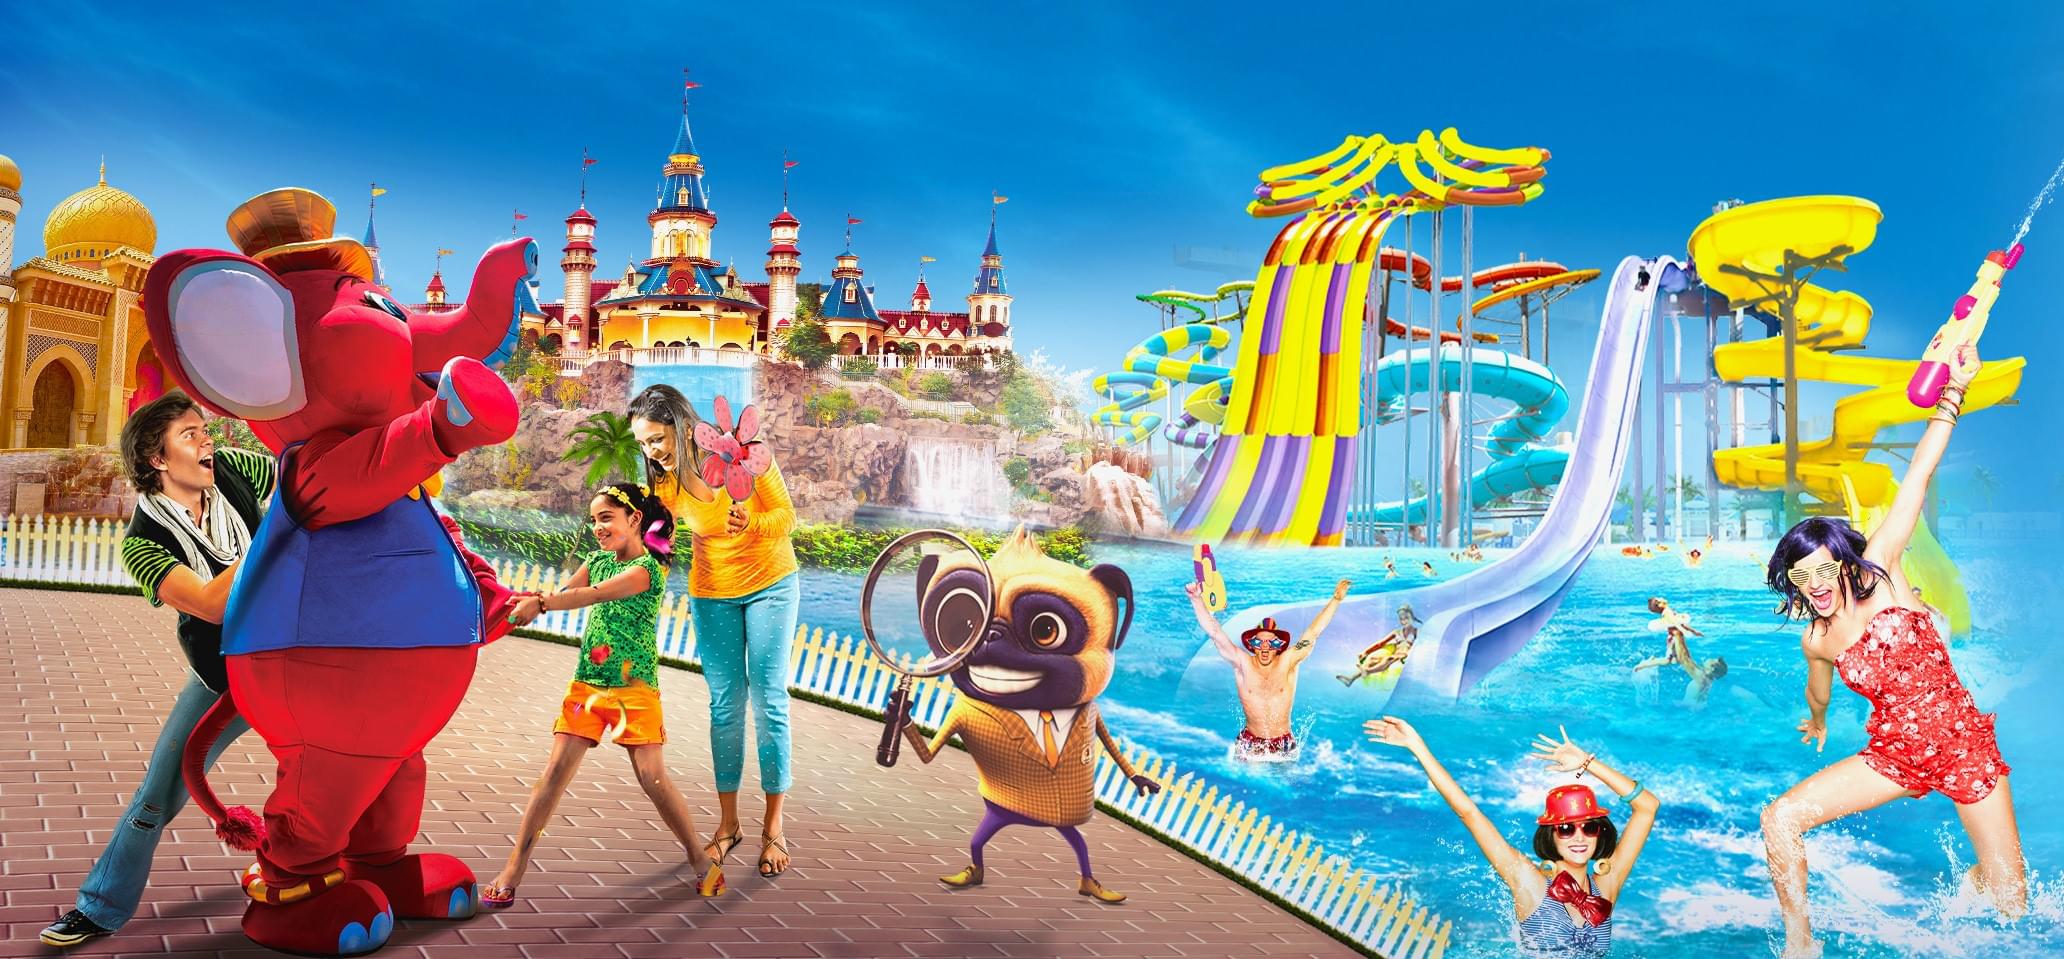 Imagicaa Theme & Water Park Tickets | Authorized Ticket Seller